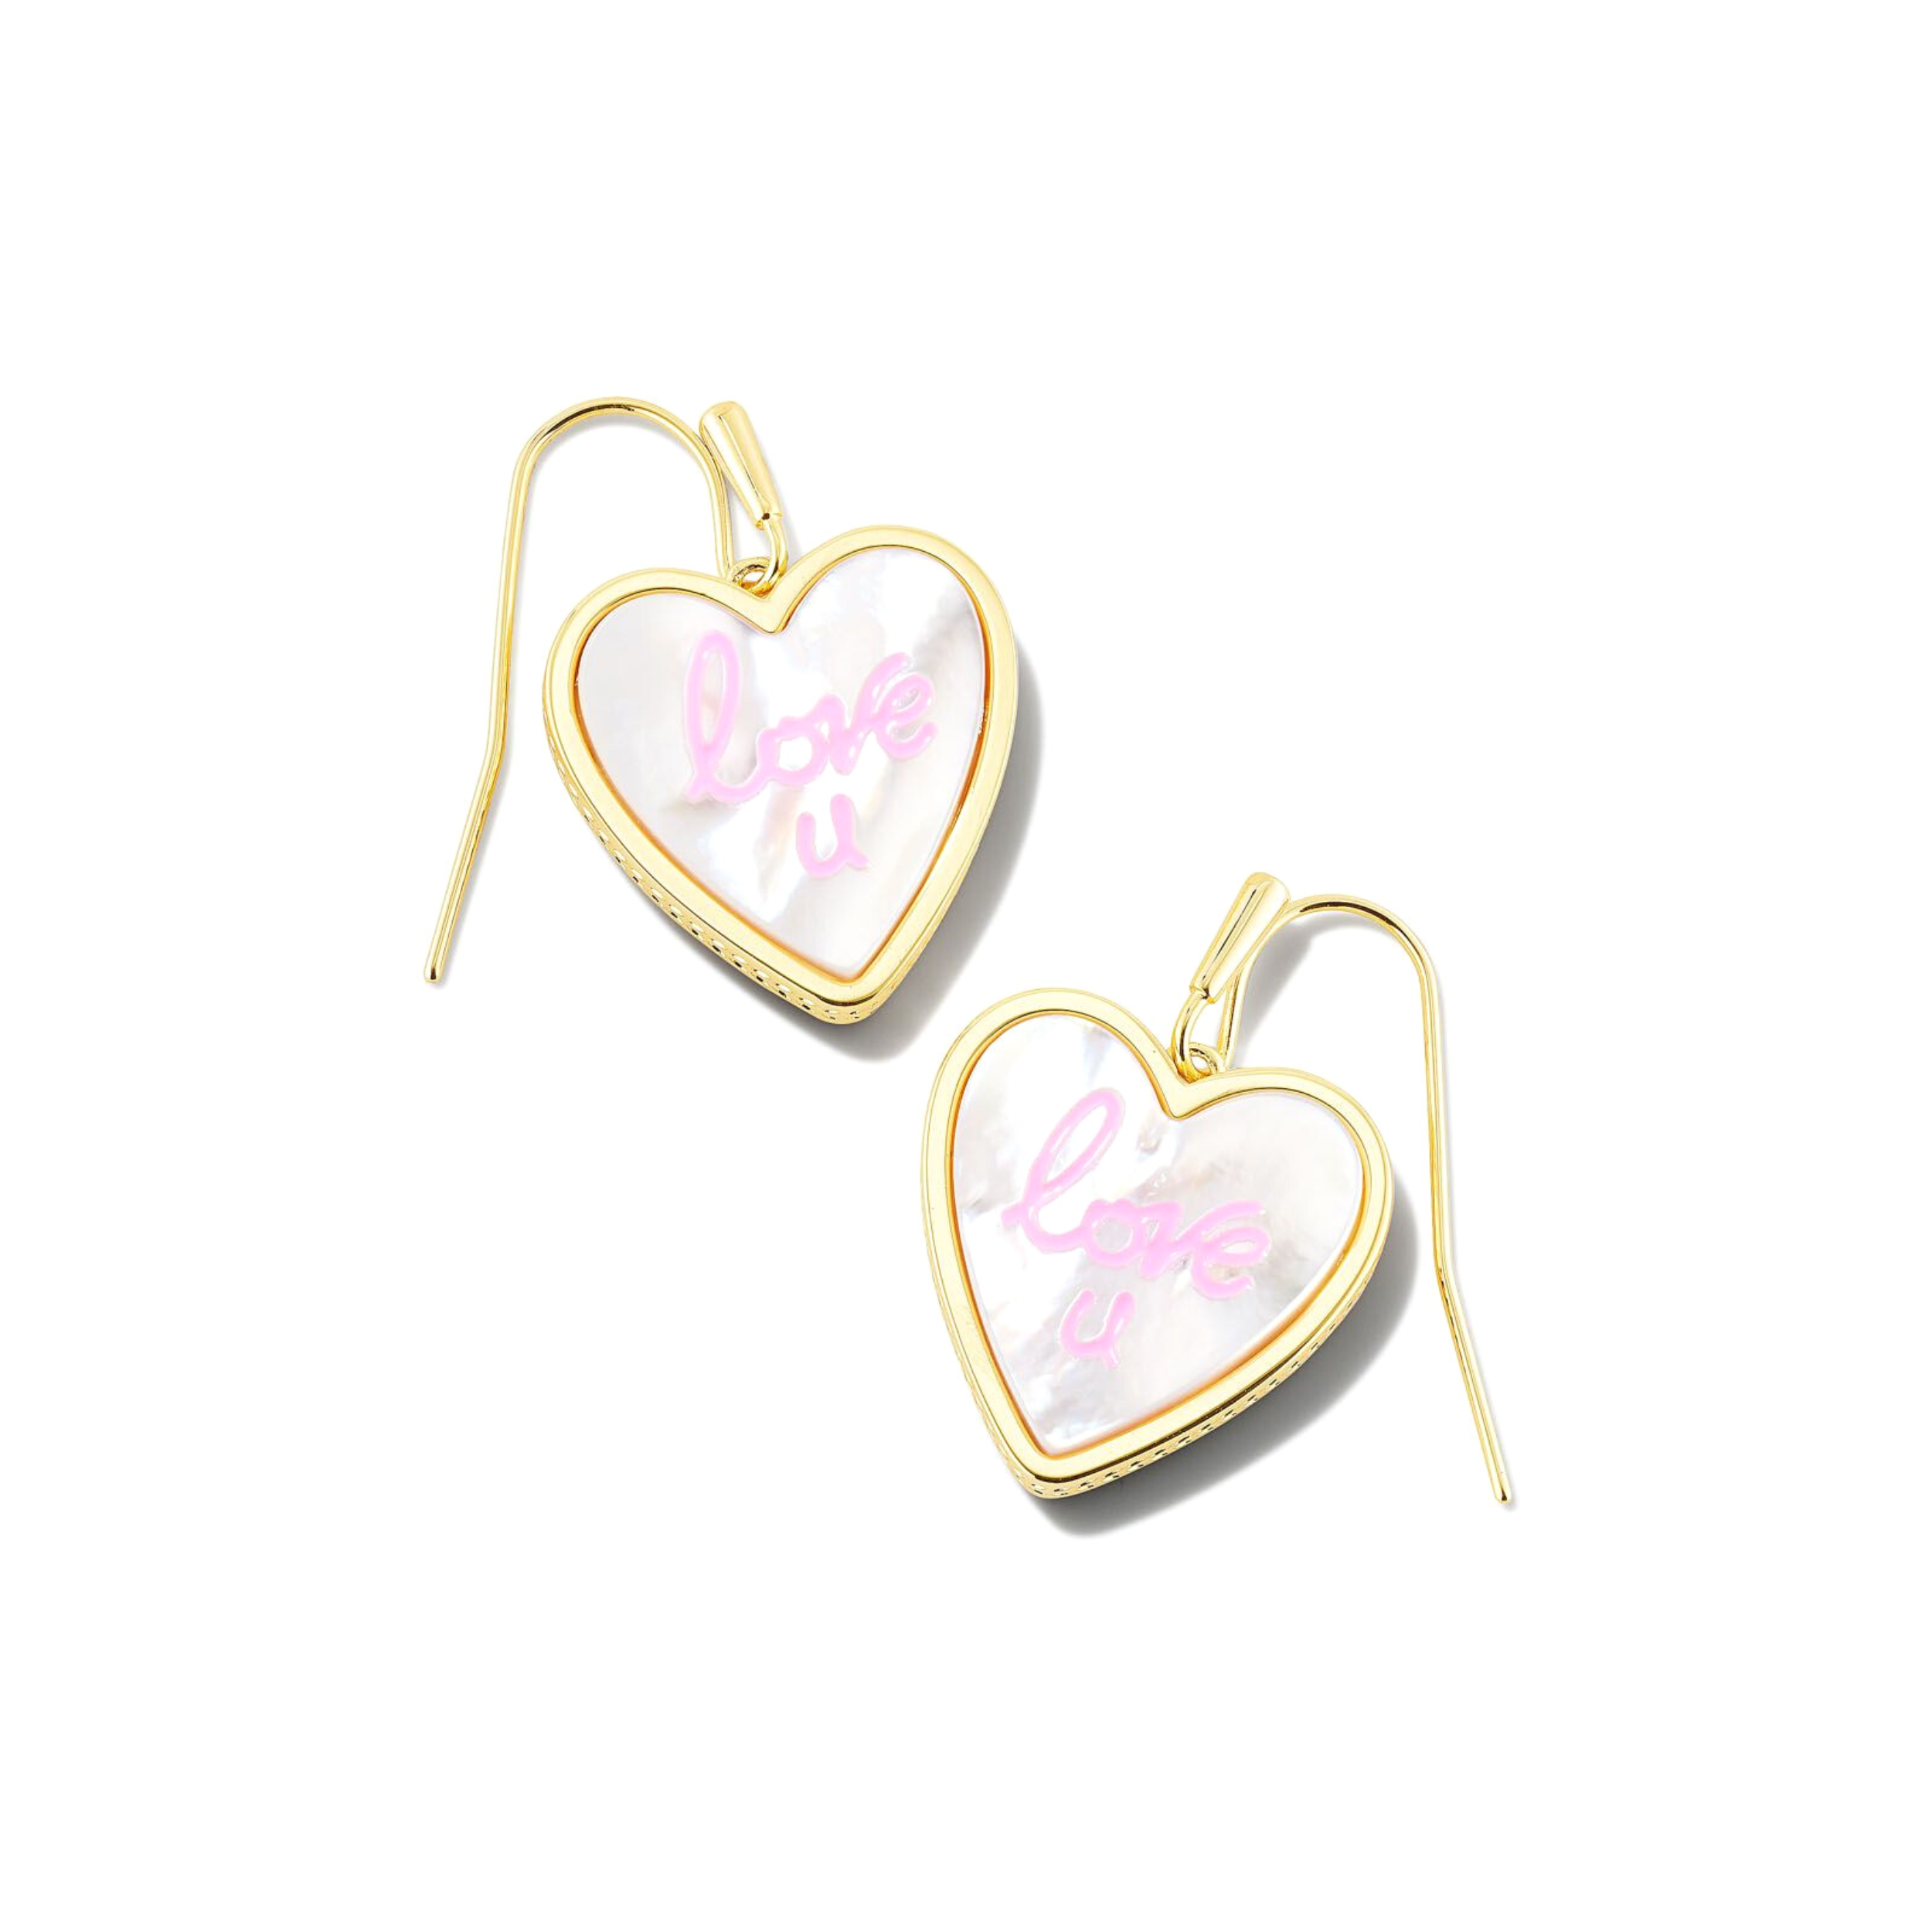 Kendra Scott | Love U Heart Gold Drop Earrings in Ivory Mother-of-Pearl - Giddy Up Glamour Boutique